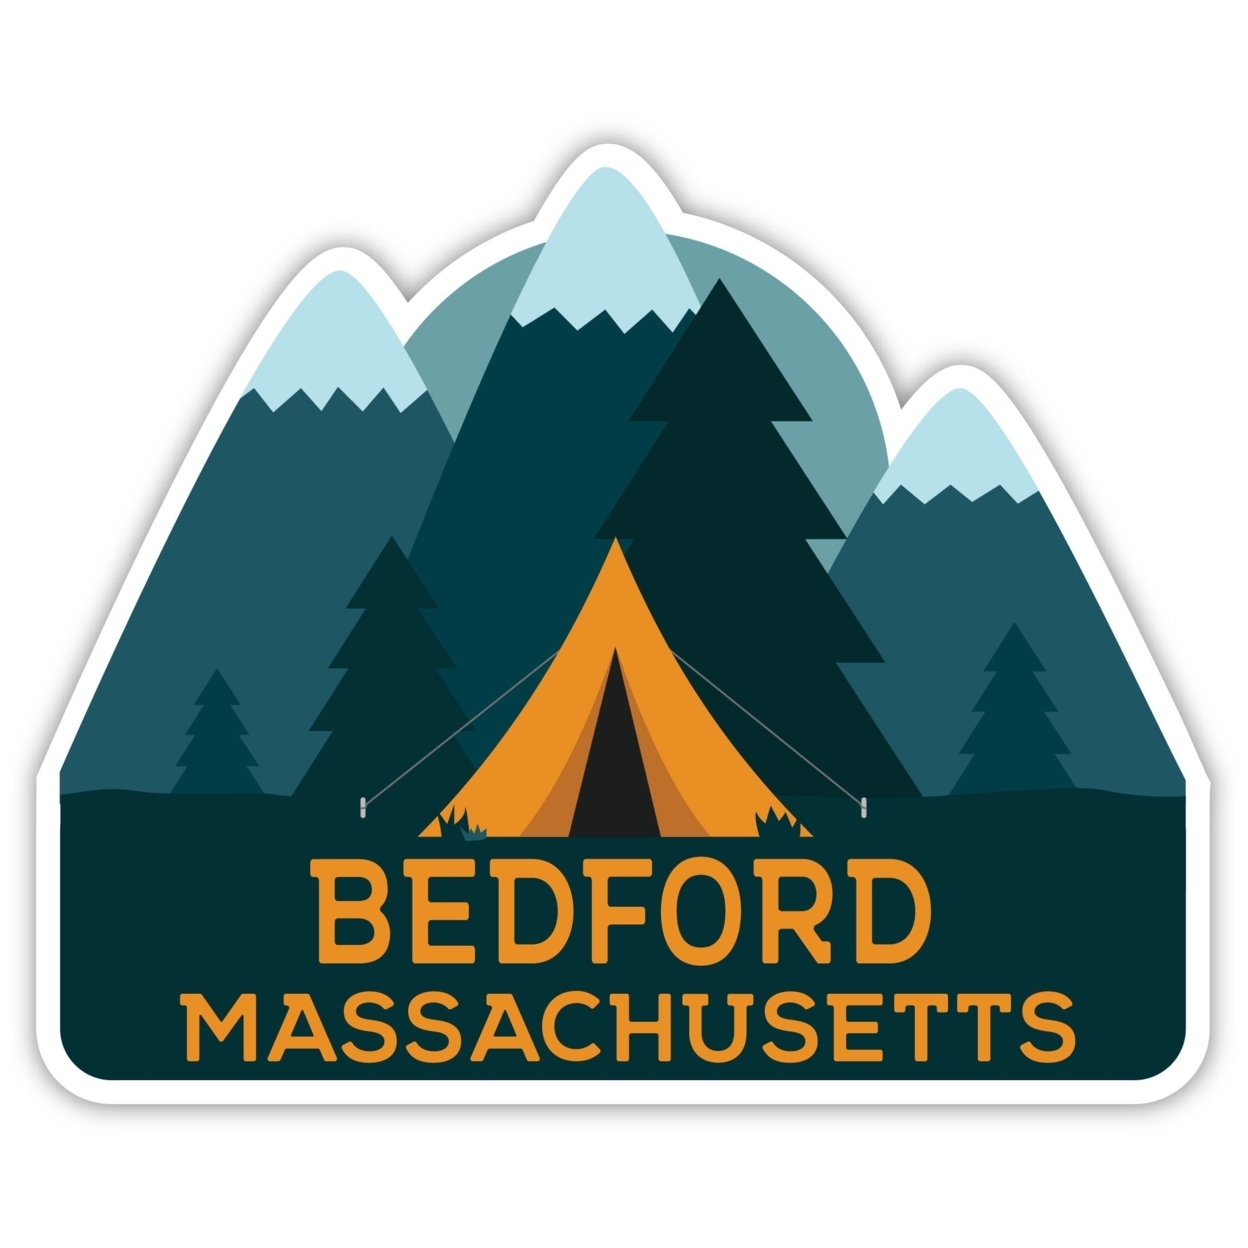 Bedford Massachusetts Souvenir Decorative Stickers (Choose Theme And Size) - 4-Pack, 4-Inch, Tent